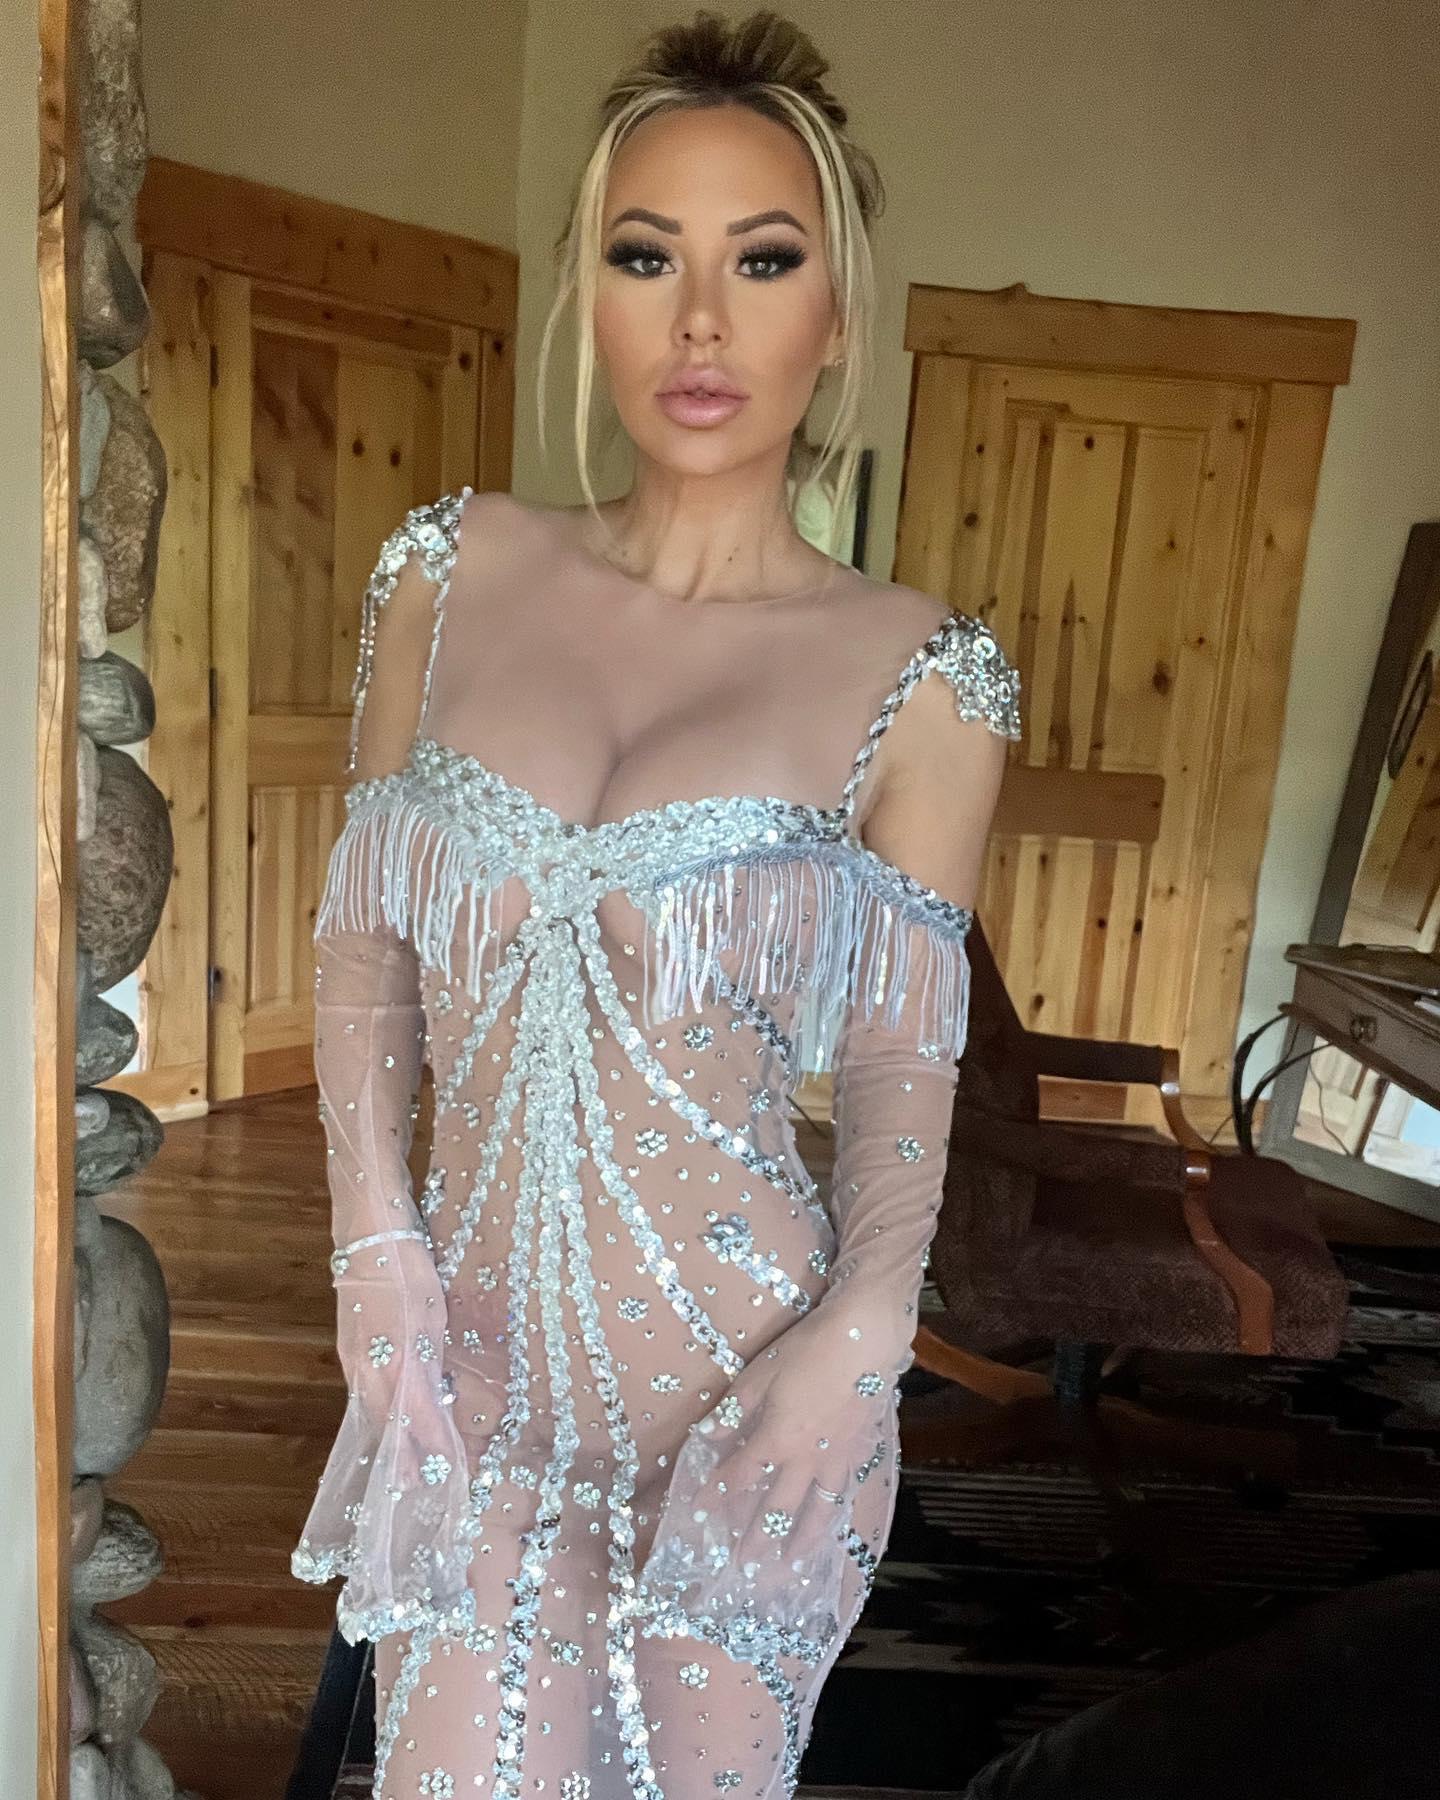 Kindly Myers poses in a see-through gown